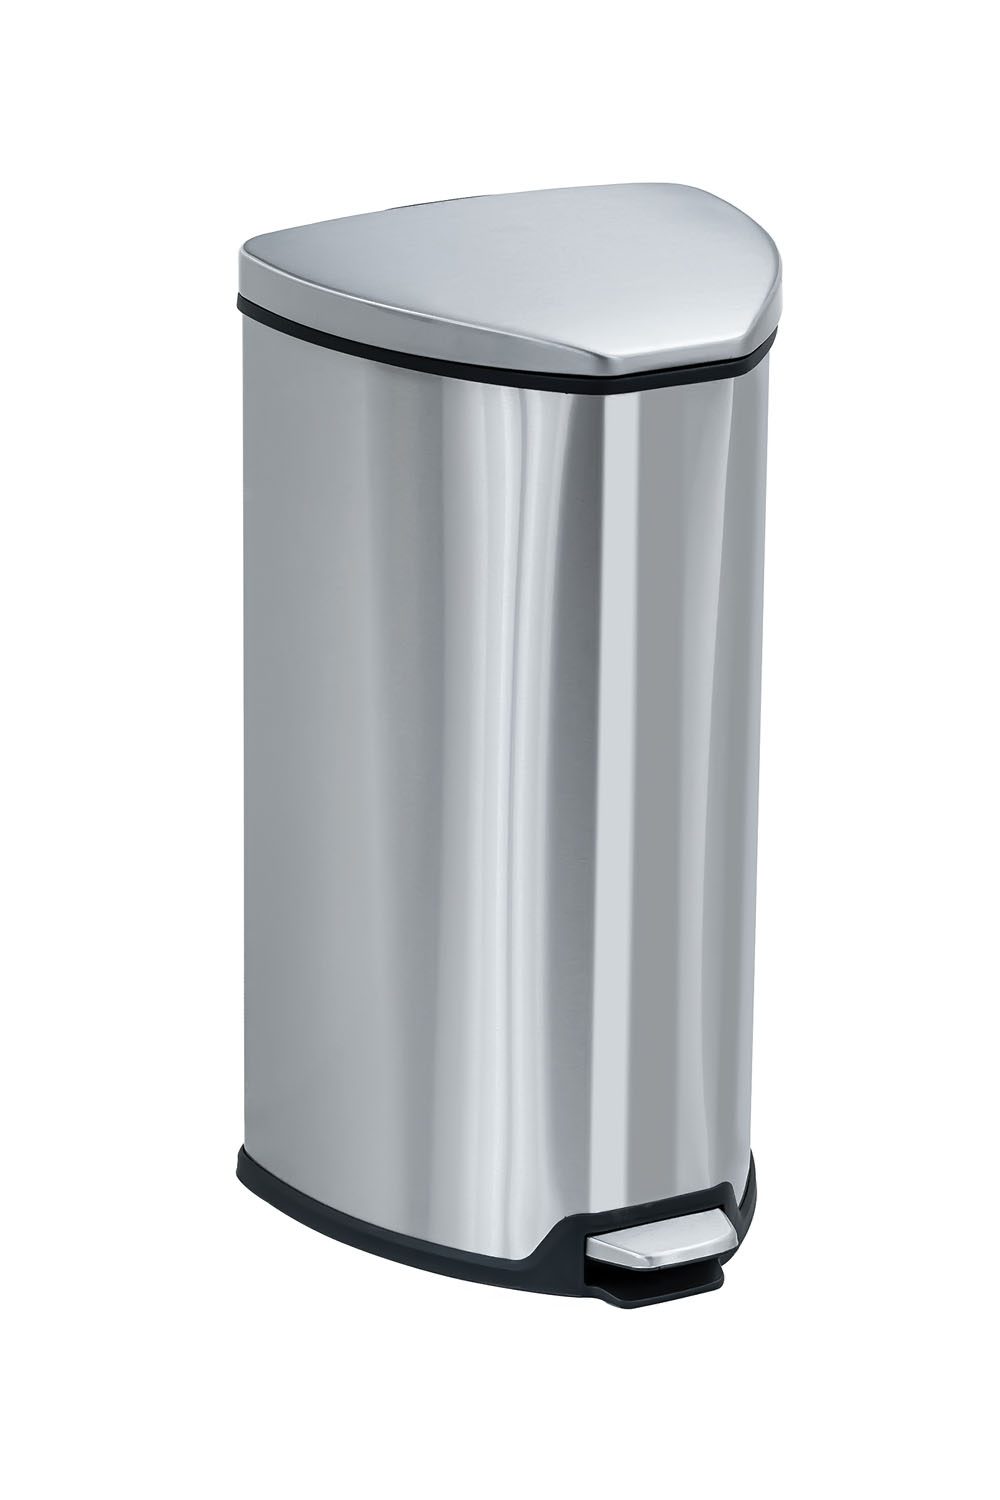 Safco Hands-free Step-on Stainless Receptacle - 7 gal Capacity - 21" Height x 14" Width x 14" Depth - Steel - Stainless Steel - 